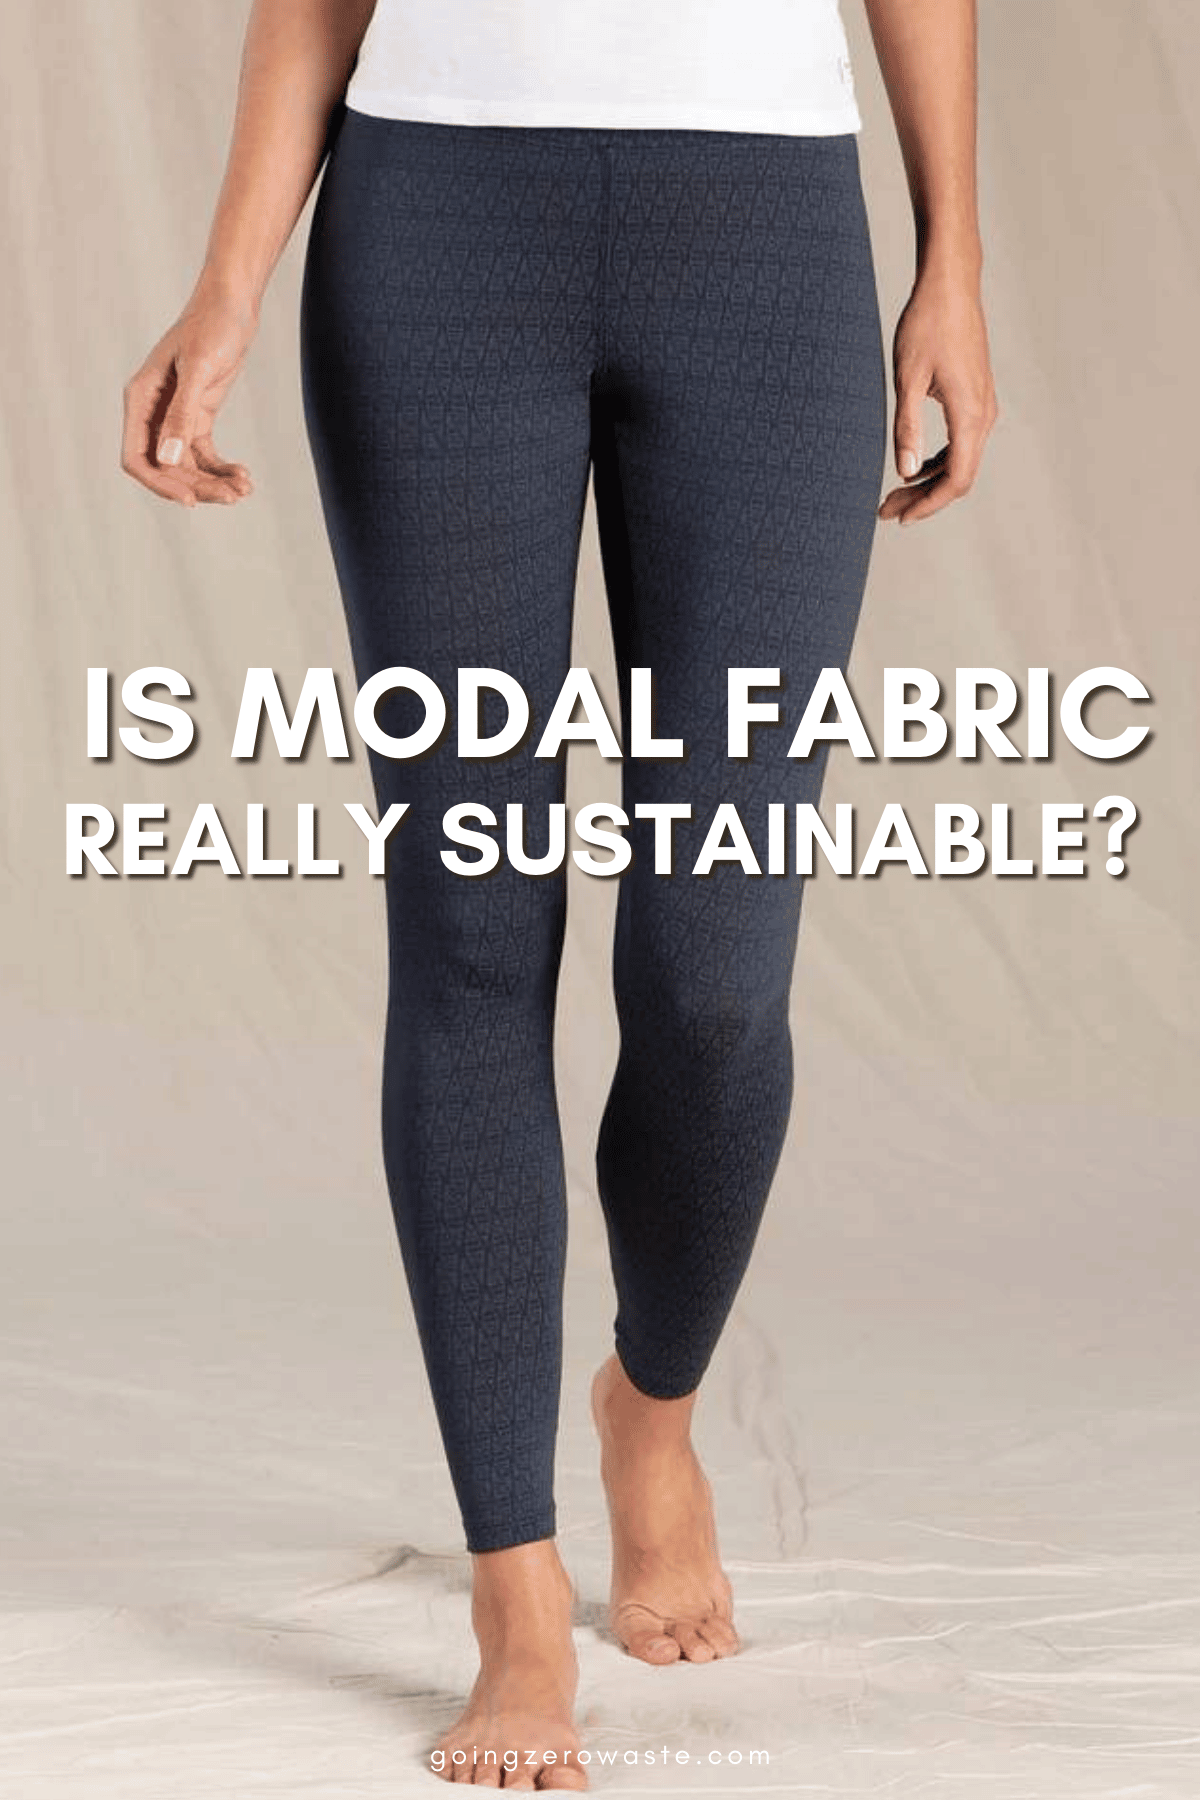 What's Modal fabric? And Is It Really Sustainable? - Going Zero Waste